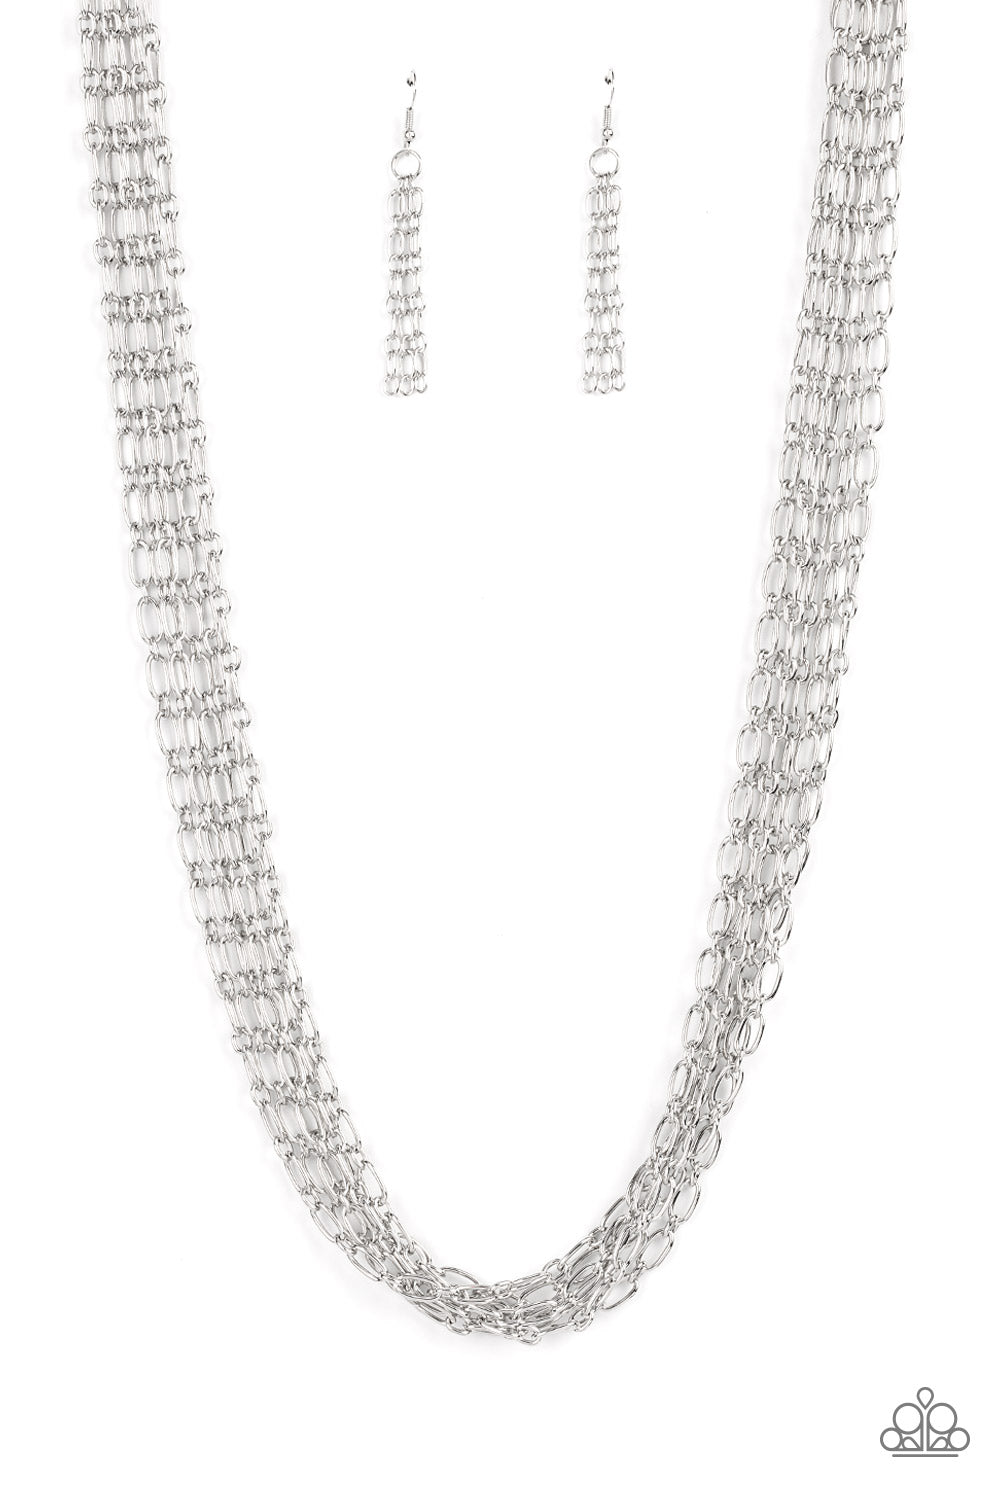 Paparazzi Accessories - Dynamite Dynamo - Silver Necklaces layer after layer of edgy silver chains drape across the chest, creating an intense industrial display. Features an adjustable clasp closure.  Sold as one individual necklace. Includes one pair of matching earrings.